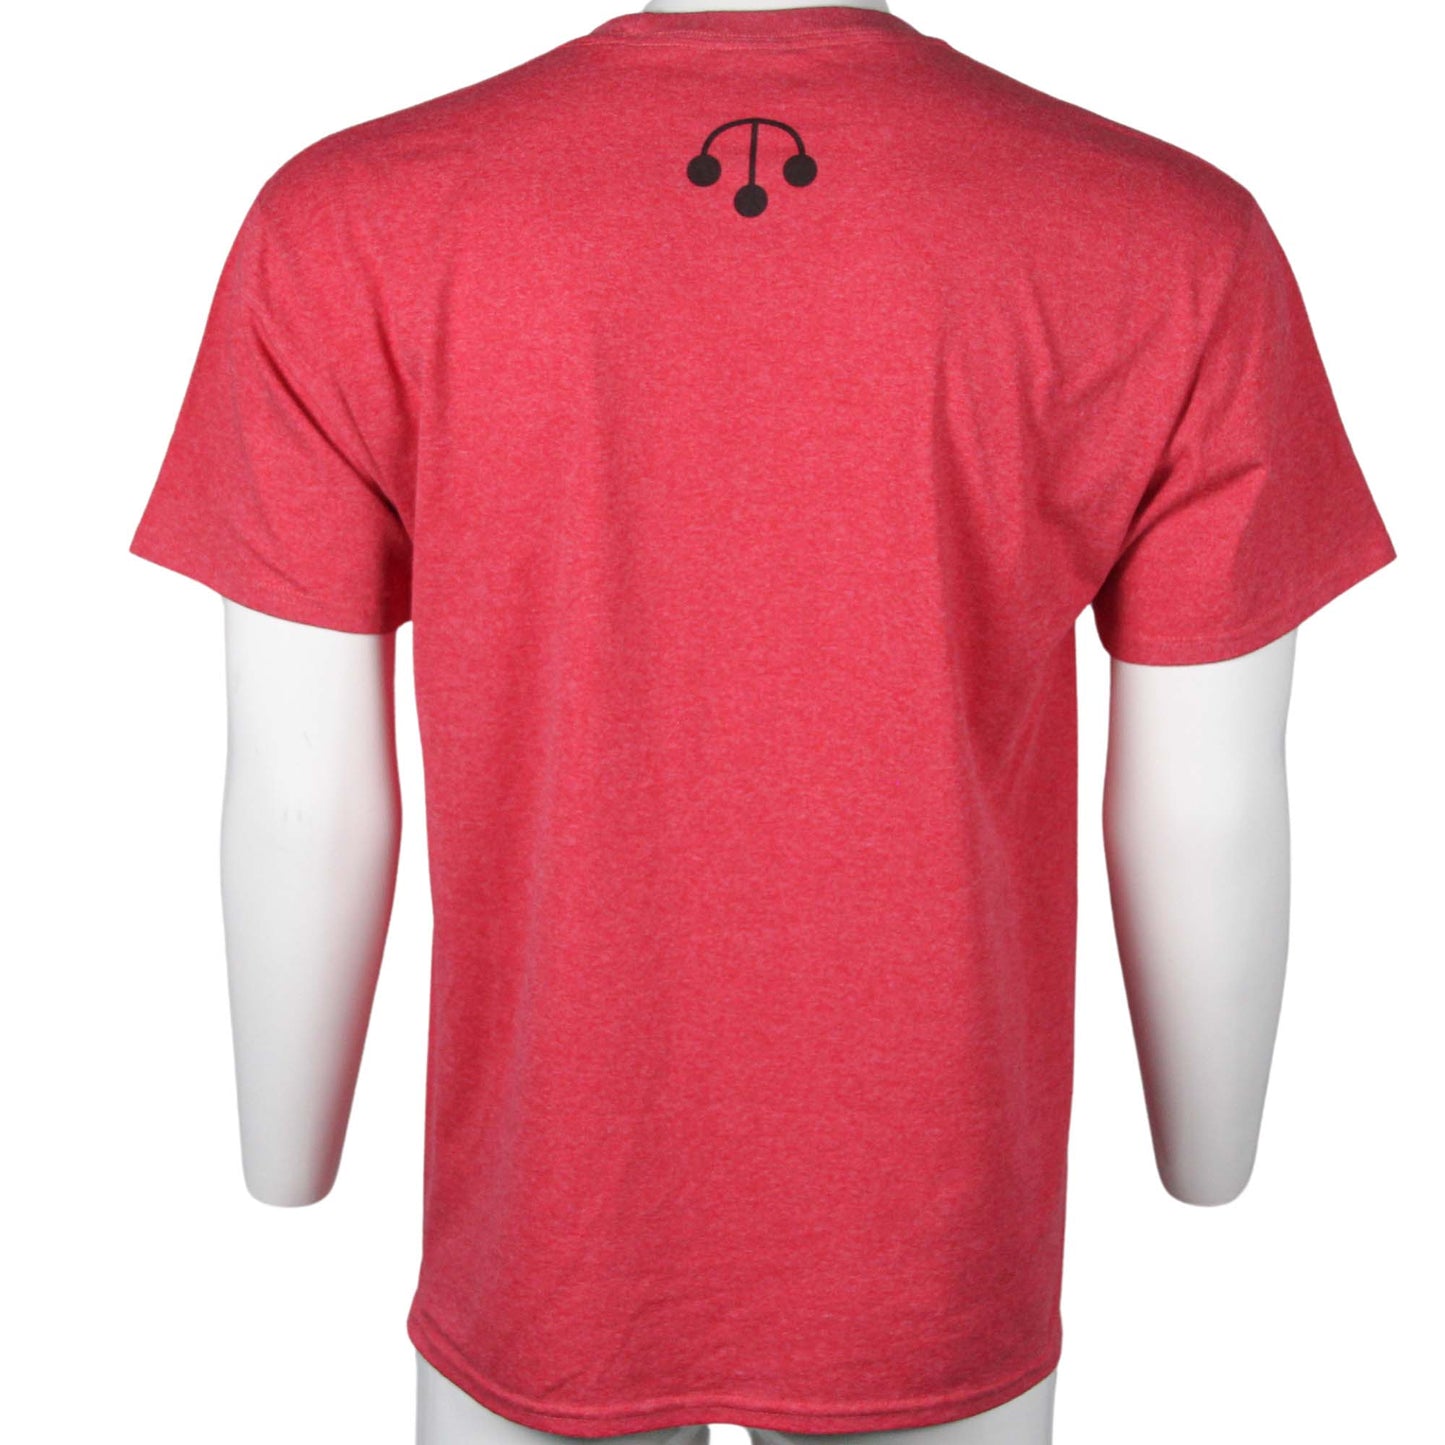 Gold & Silver Pawn Shop "Expert" Round Neck T-Shirt Red Back